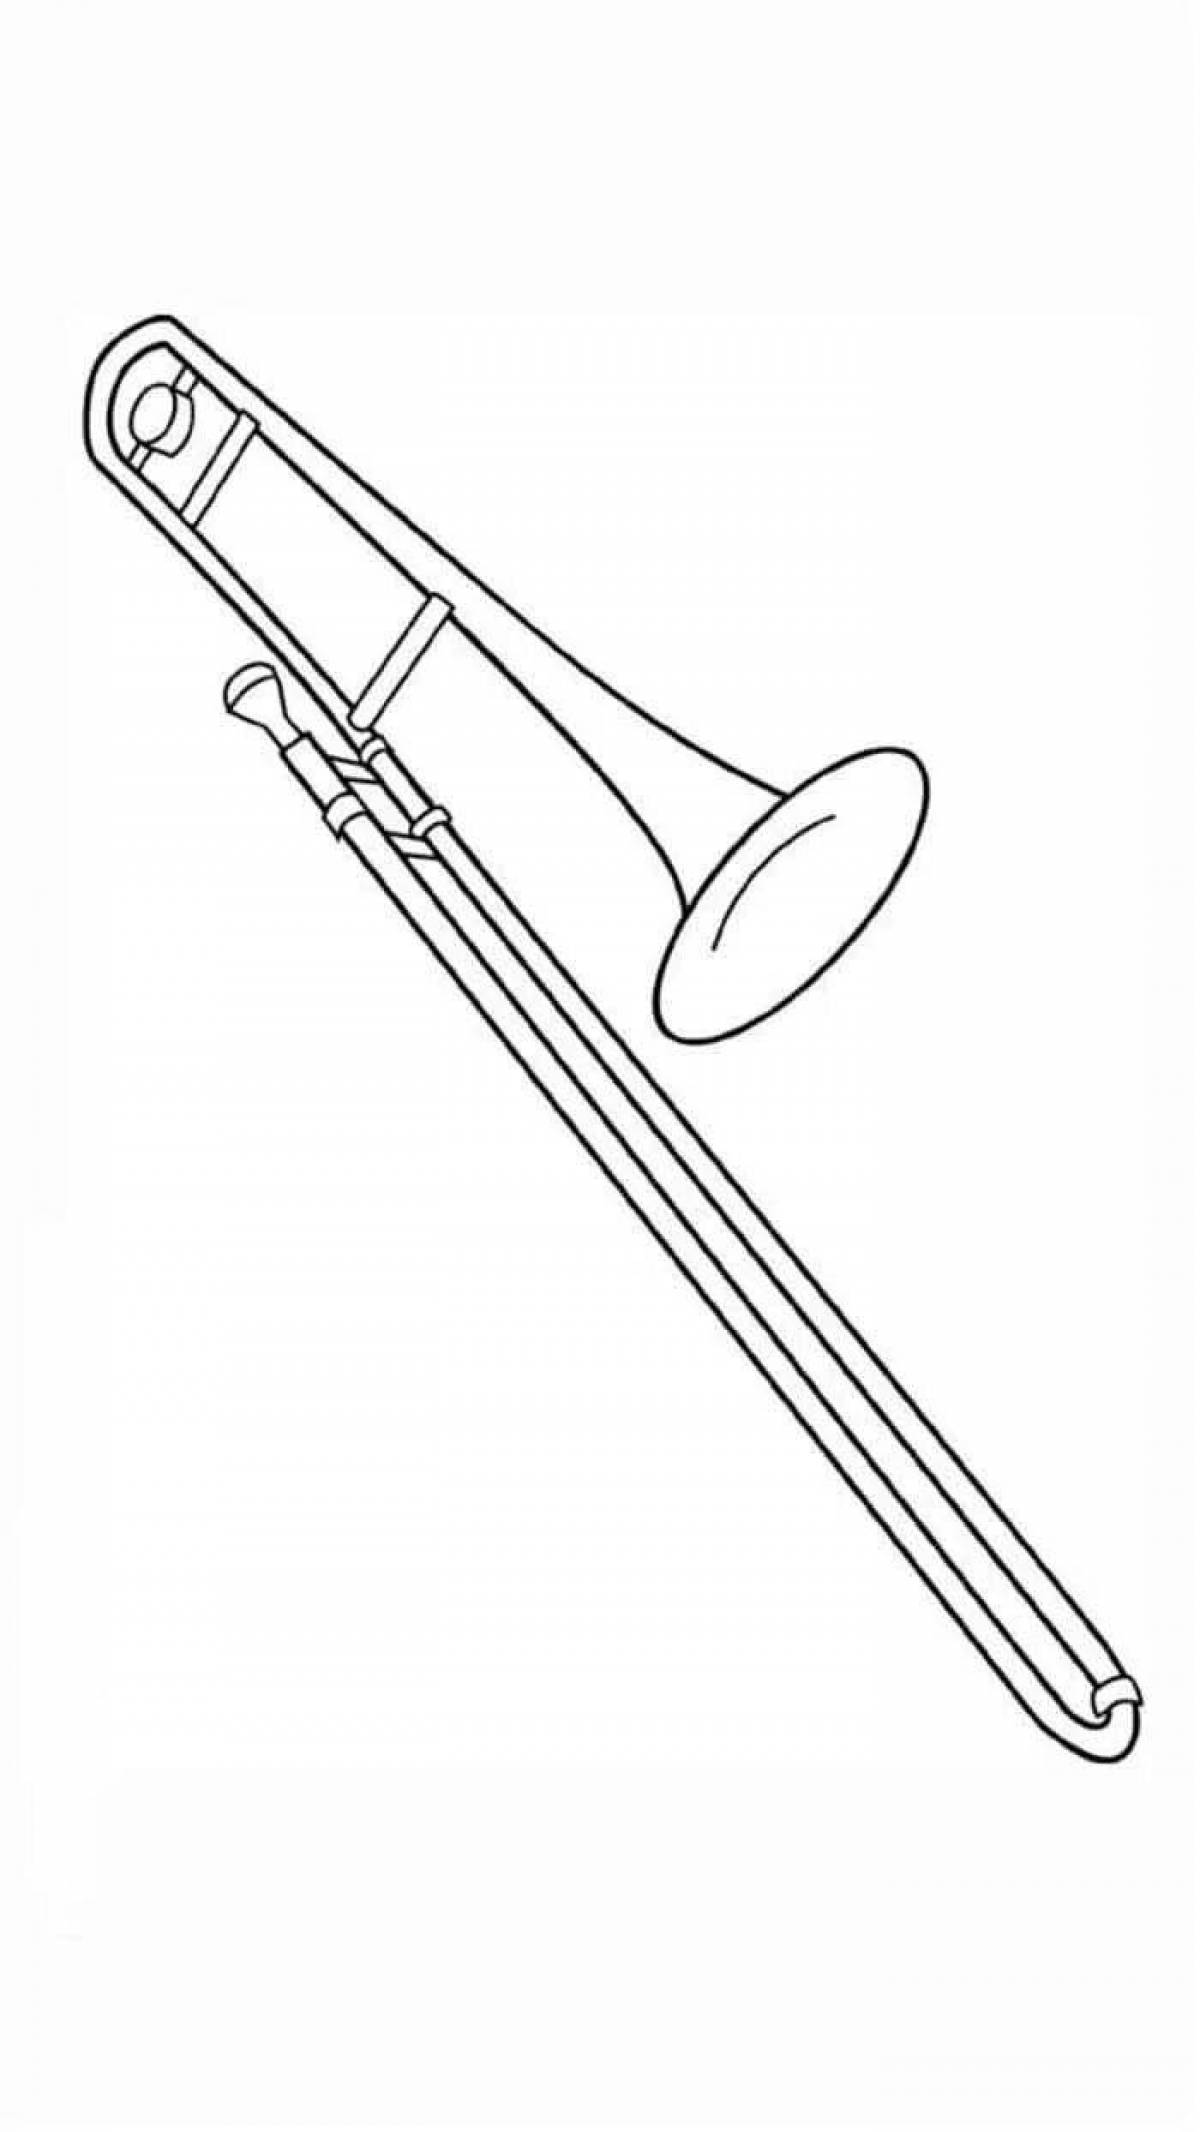 Coloring page joyful wind instruments